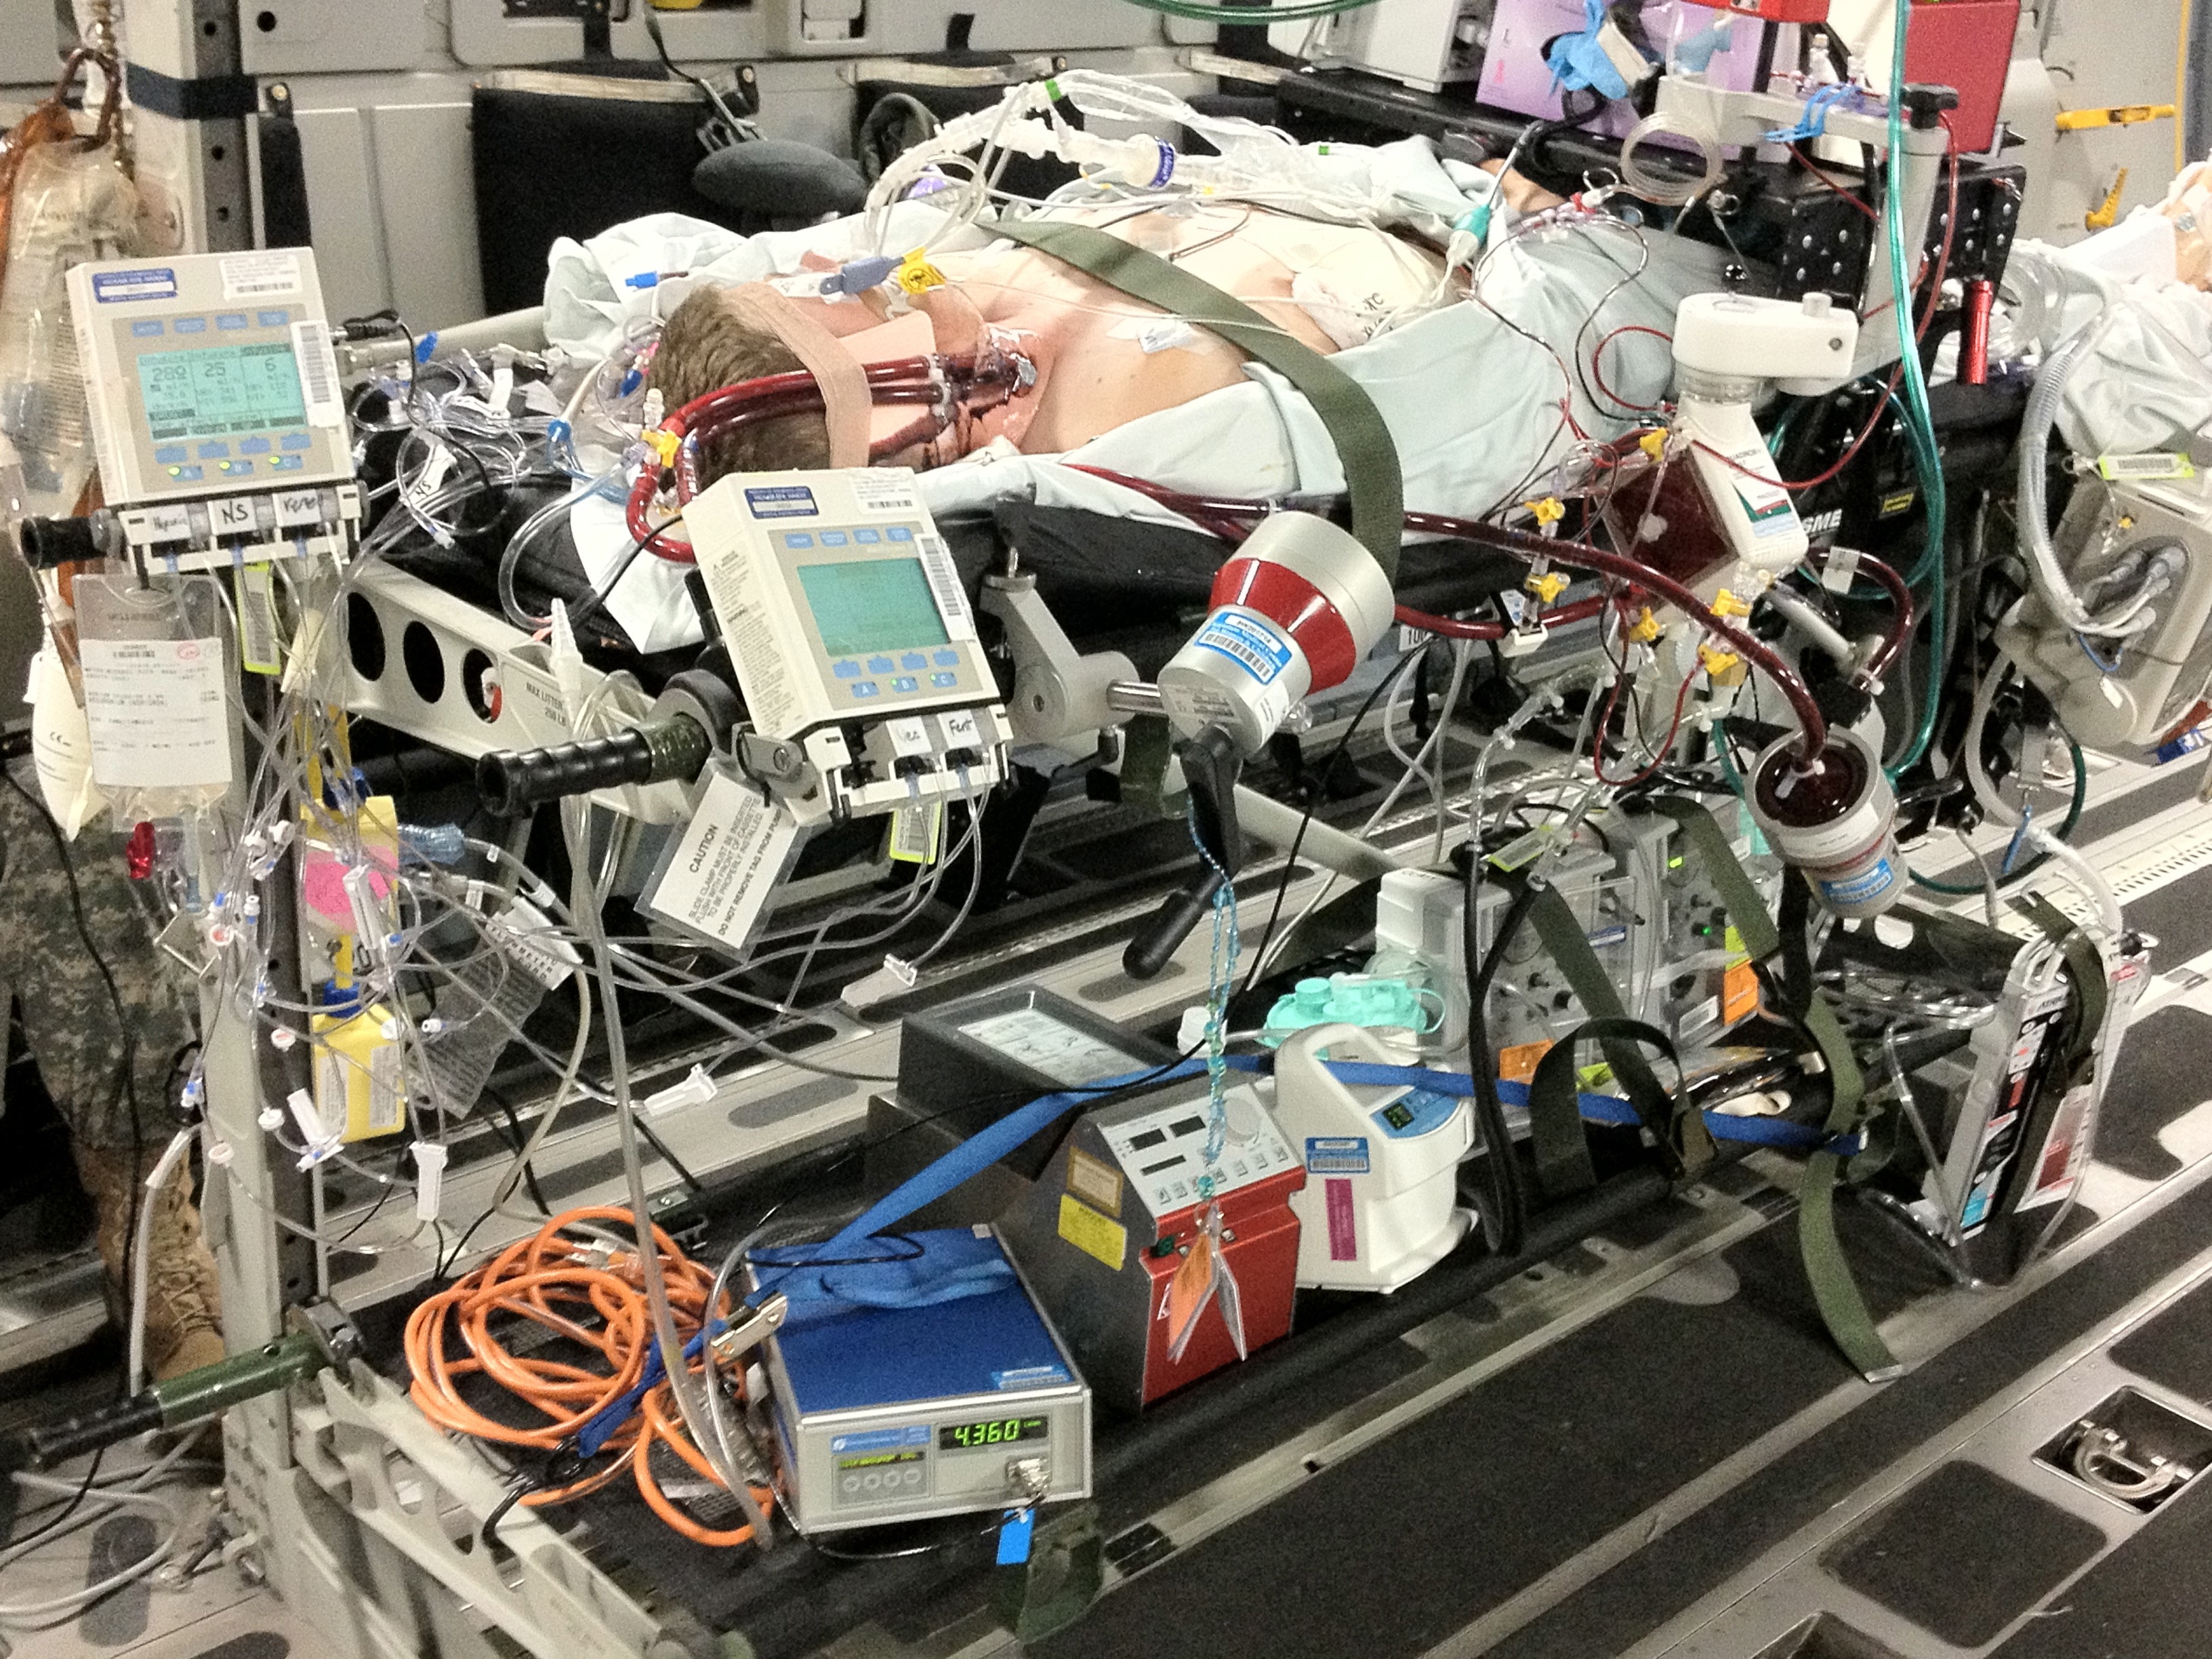 #Reanimate16: What We Can Learn From Resuscitators Around the World?